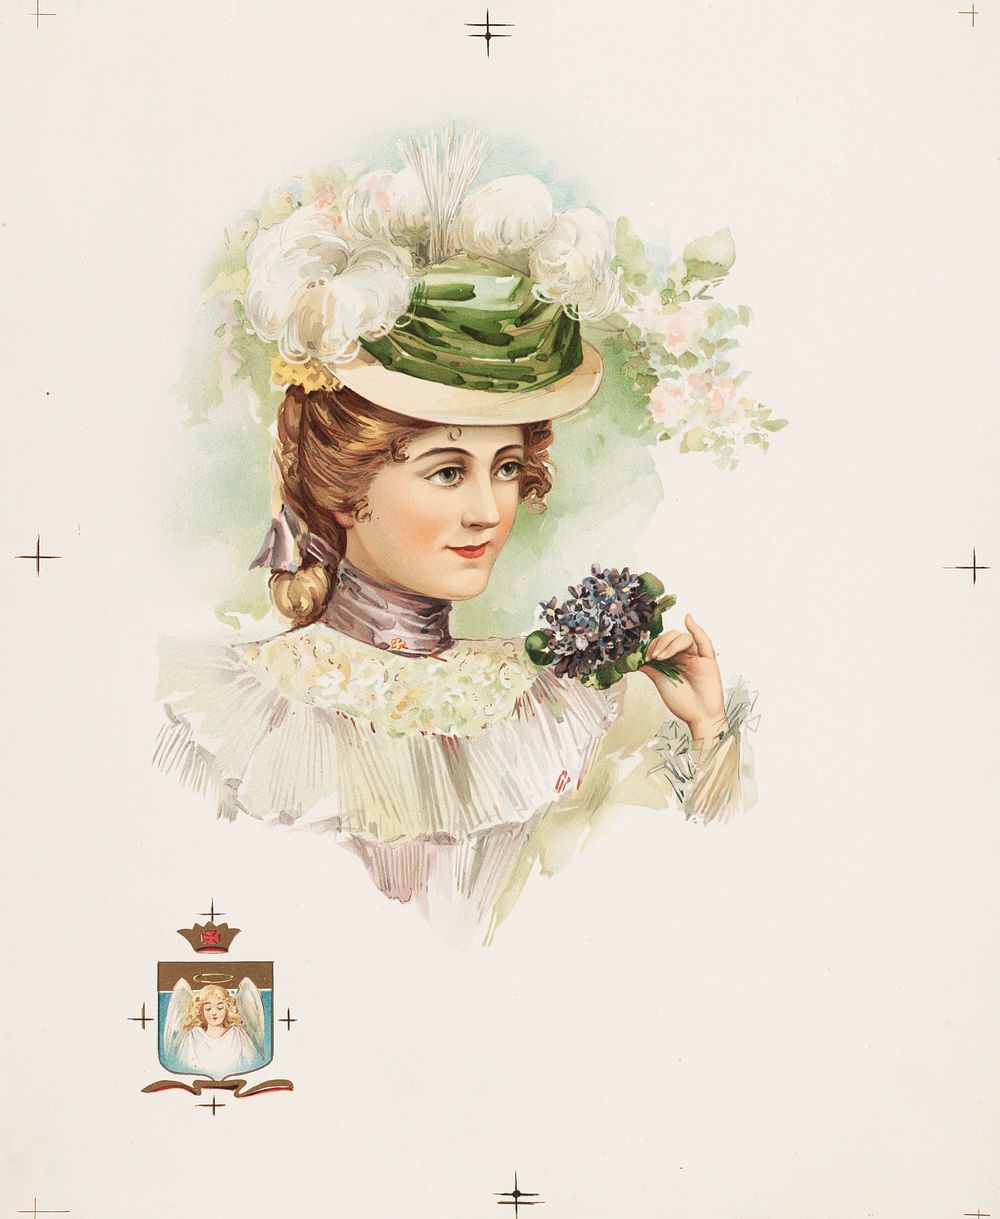 Woman with posy